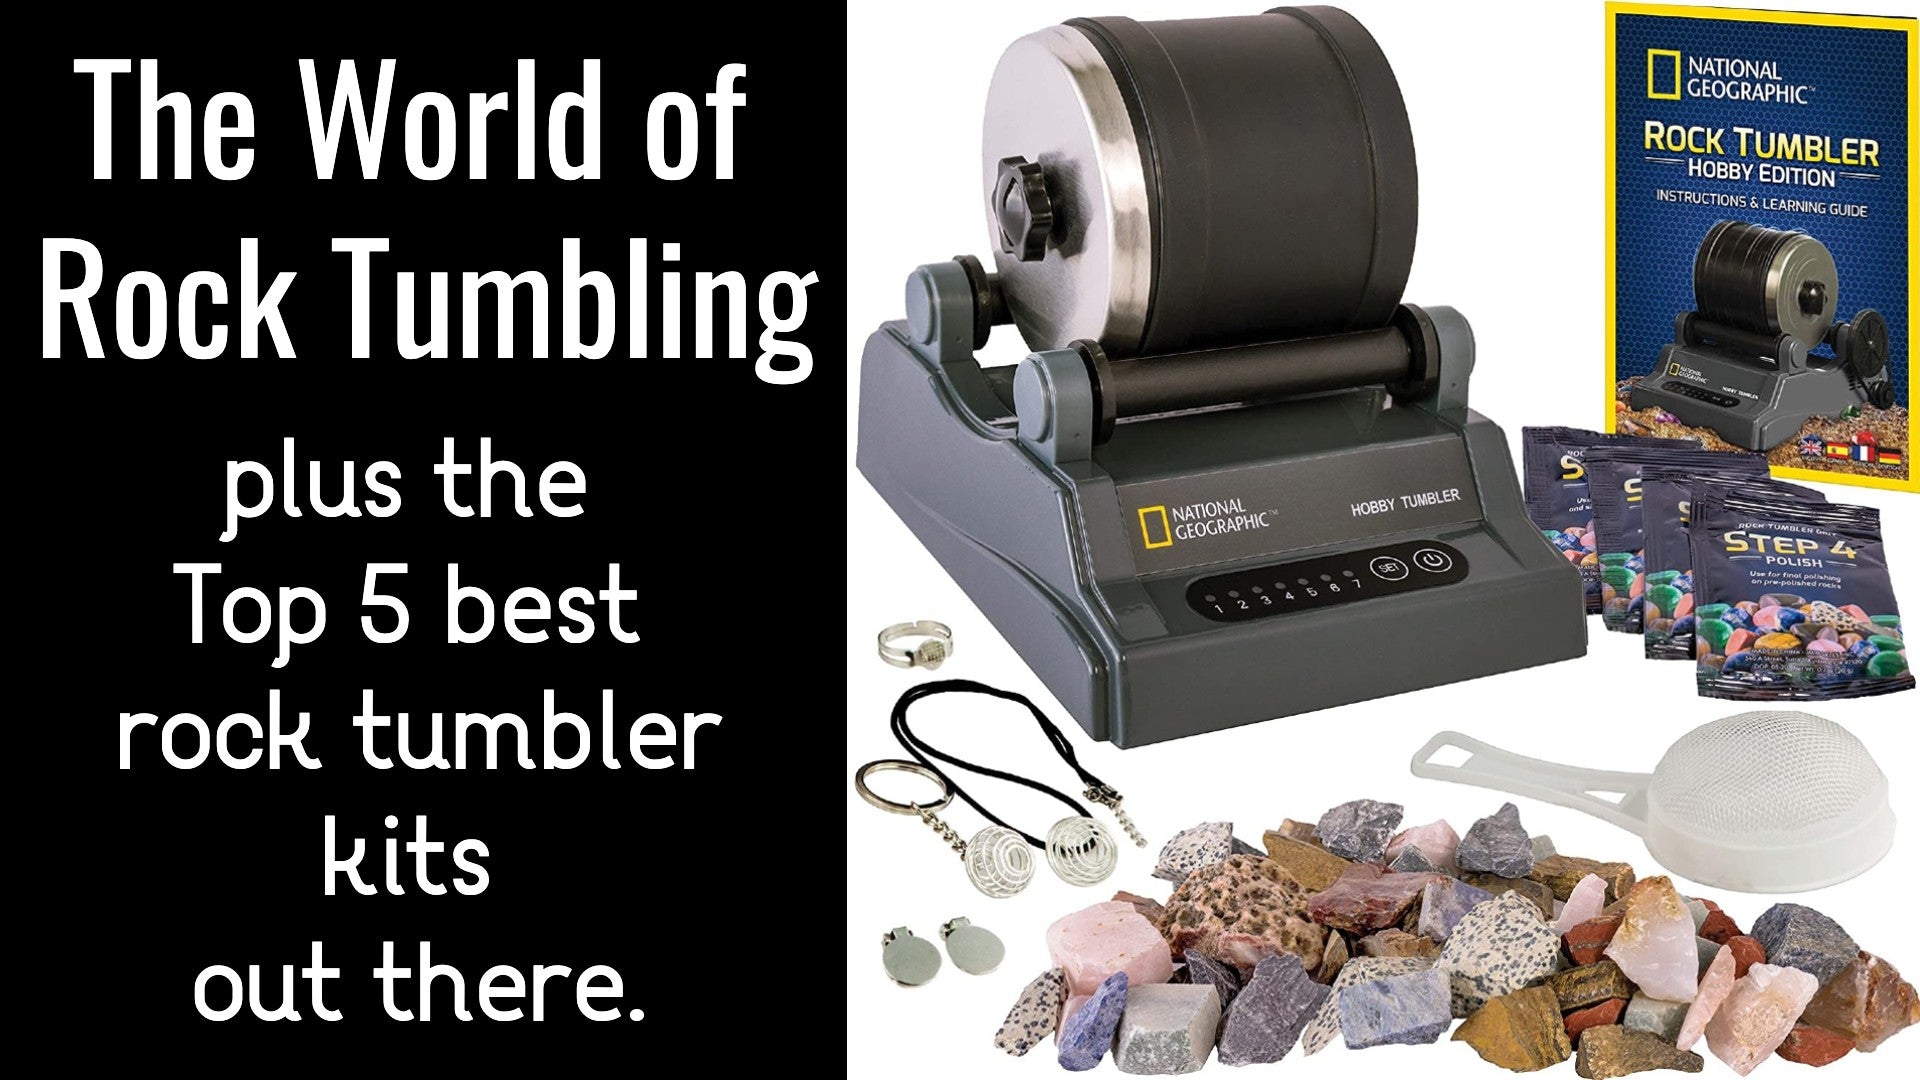 The World of Rock Tumbling and the Top 5 best rock tumbling kits